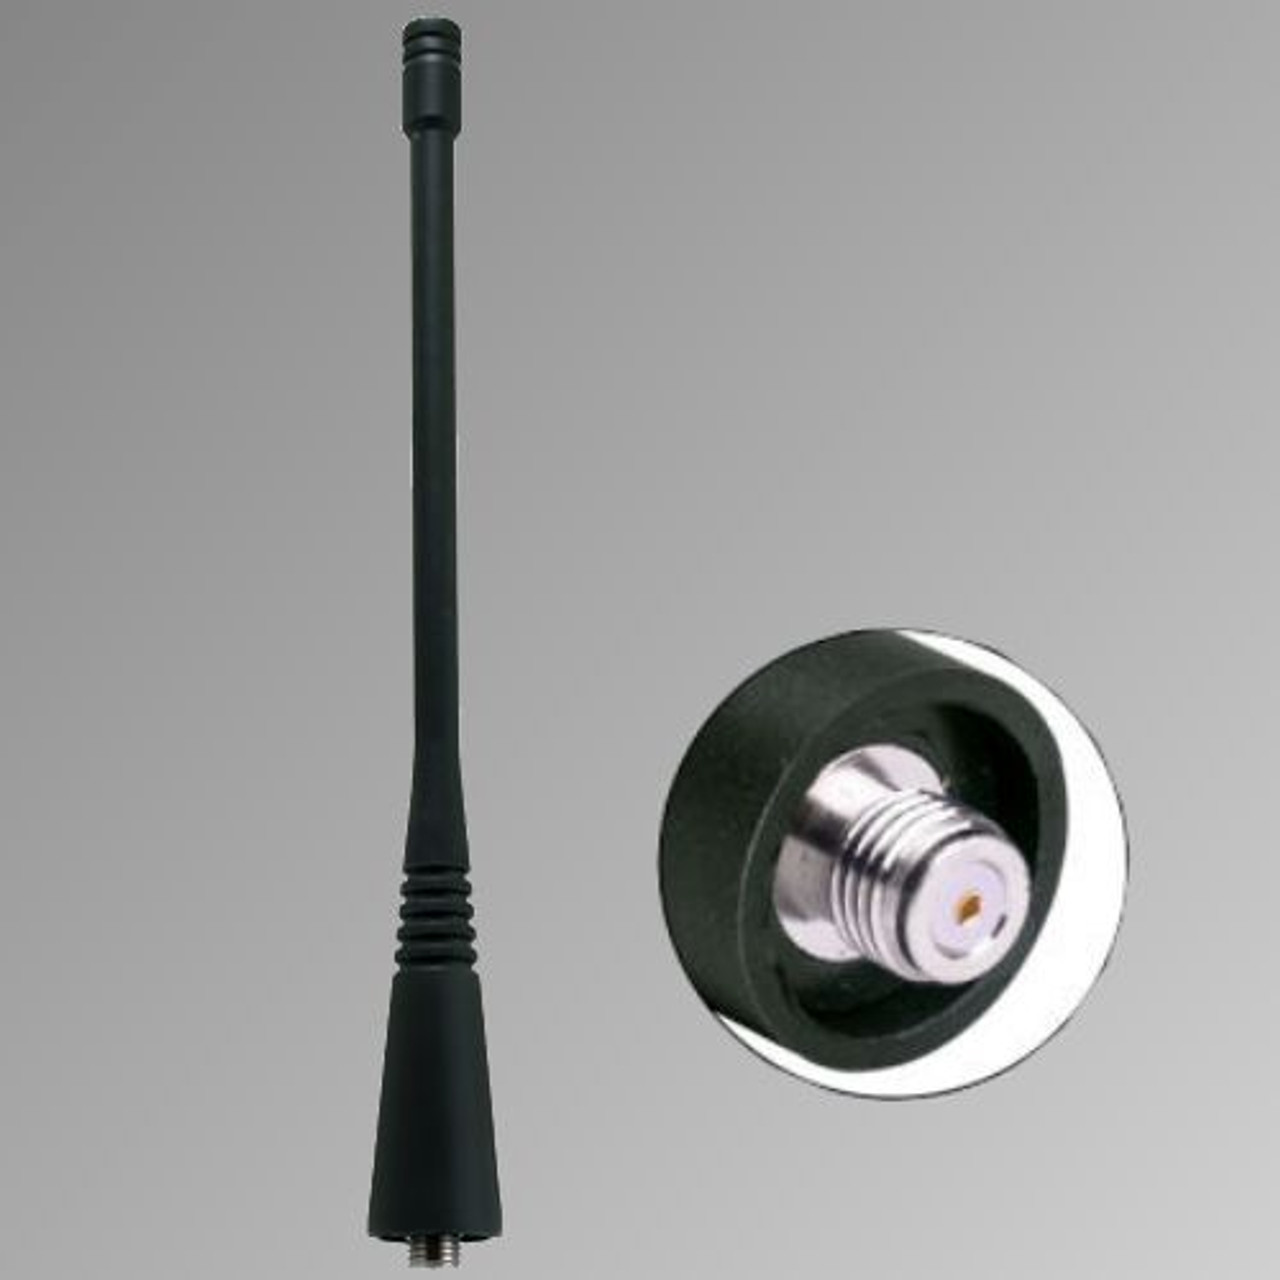 EF Johnson 51FIRE ES 1/2 Wave Extended Range Antenna - 5.7", Dual-Band, 698-870 MHz